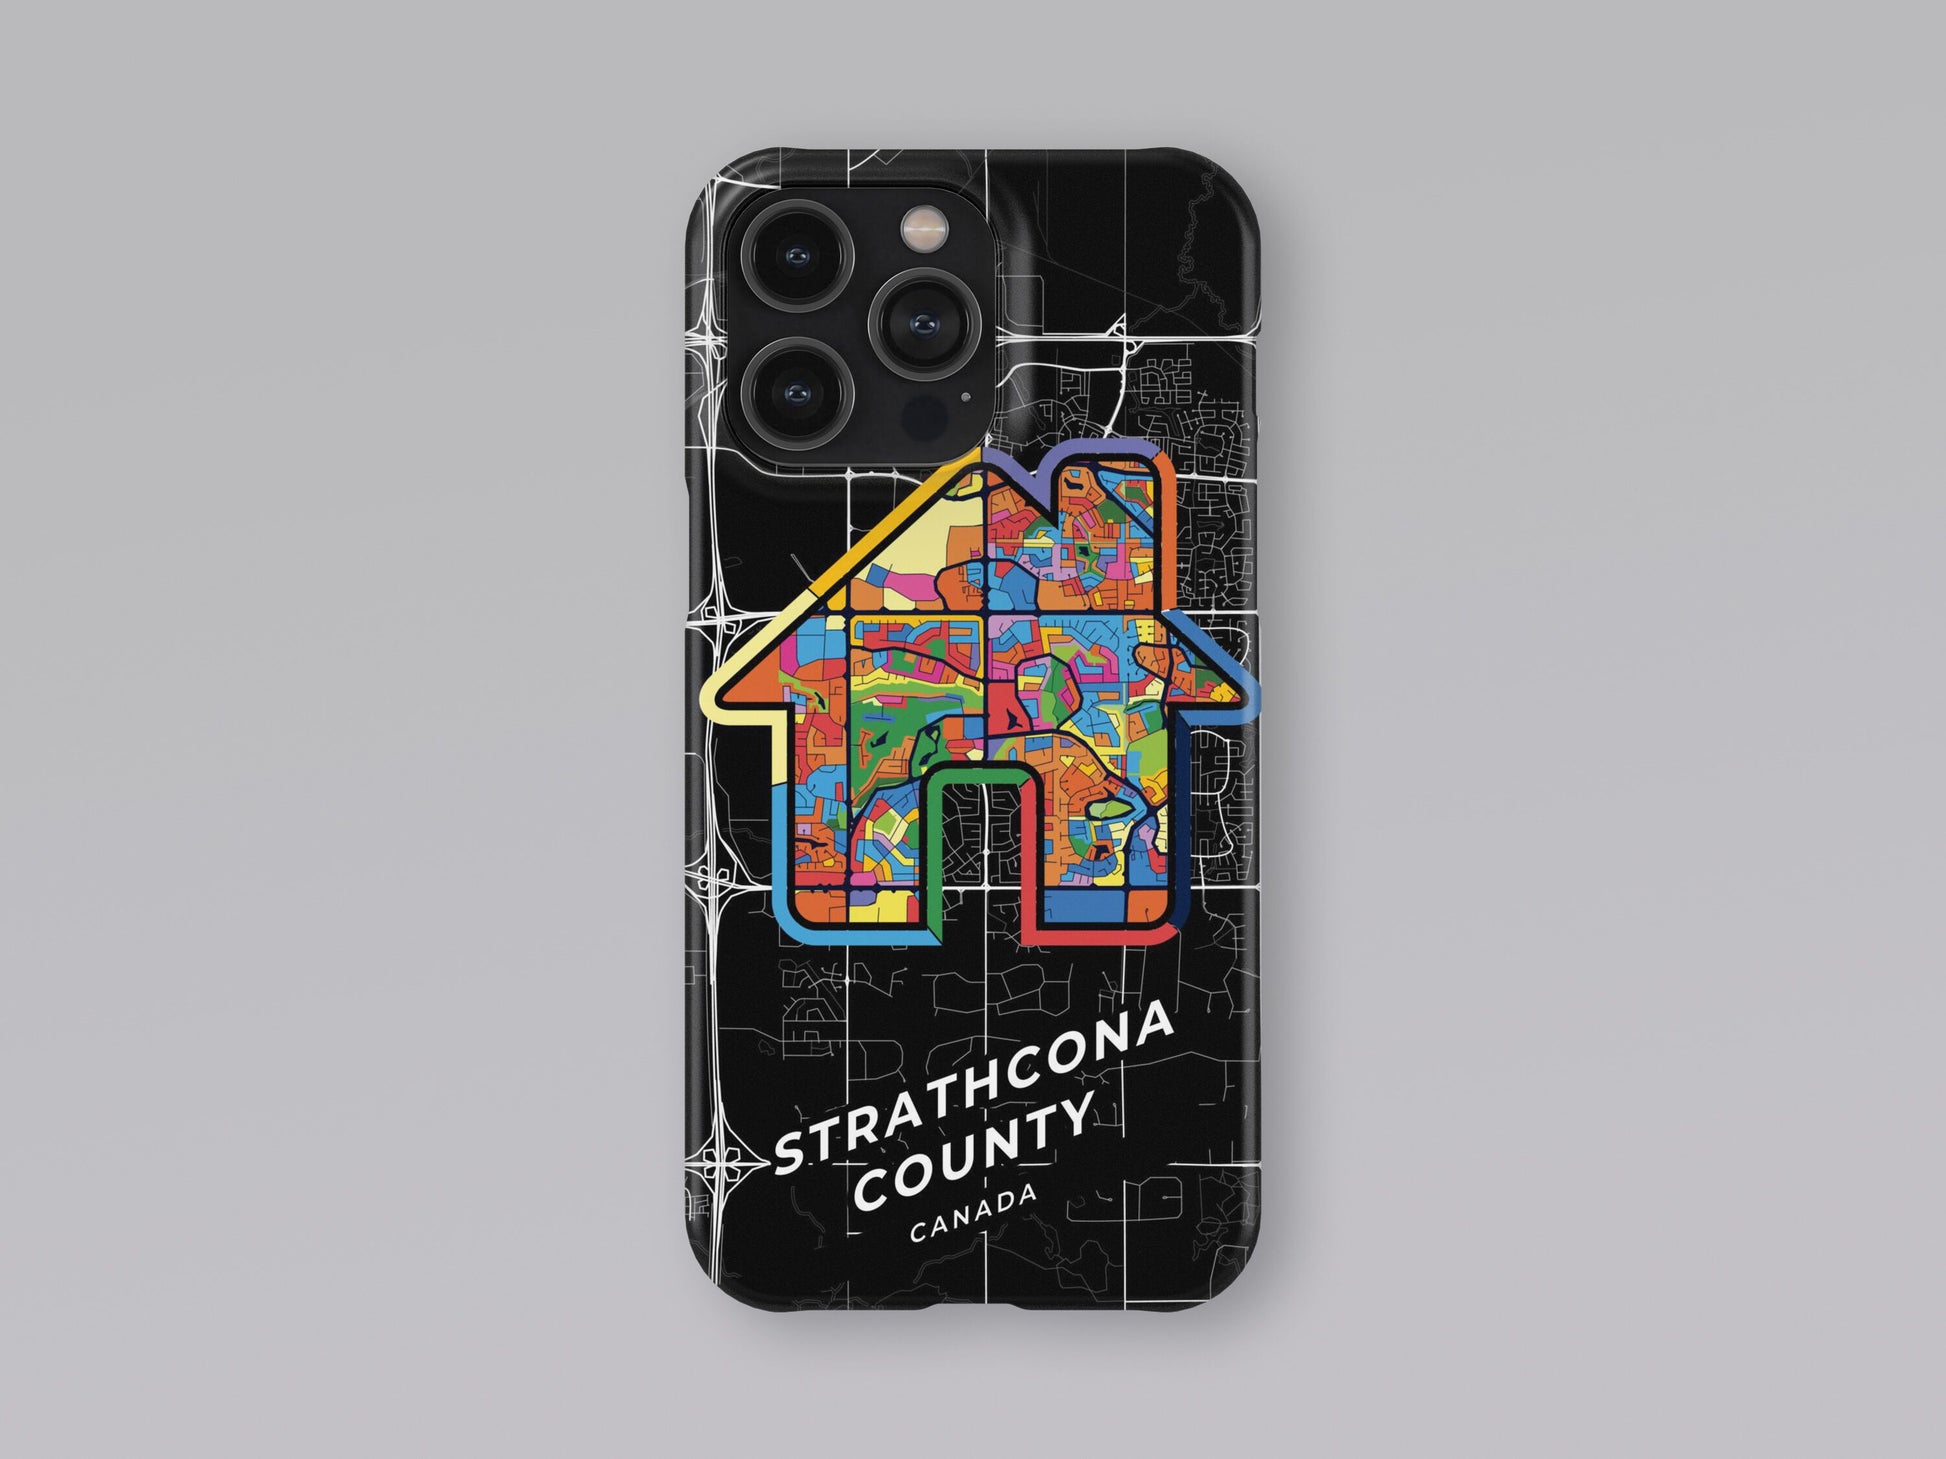 Strathcona County Canada slim phone case with colorful icon 3